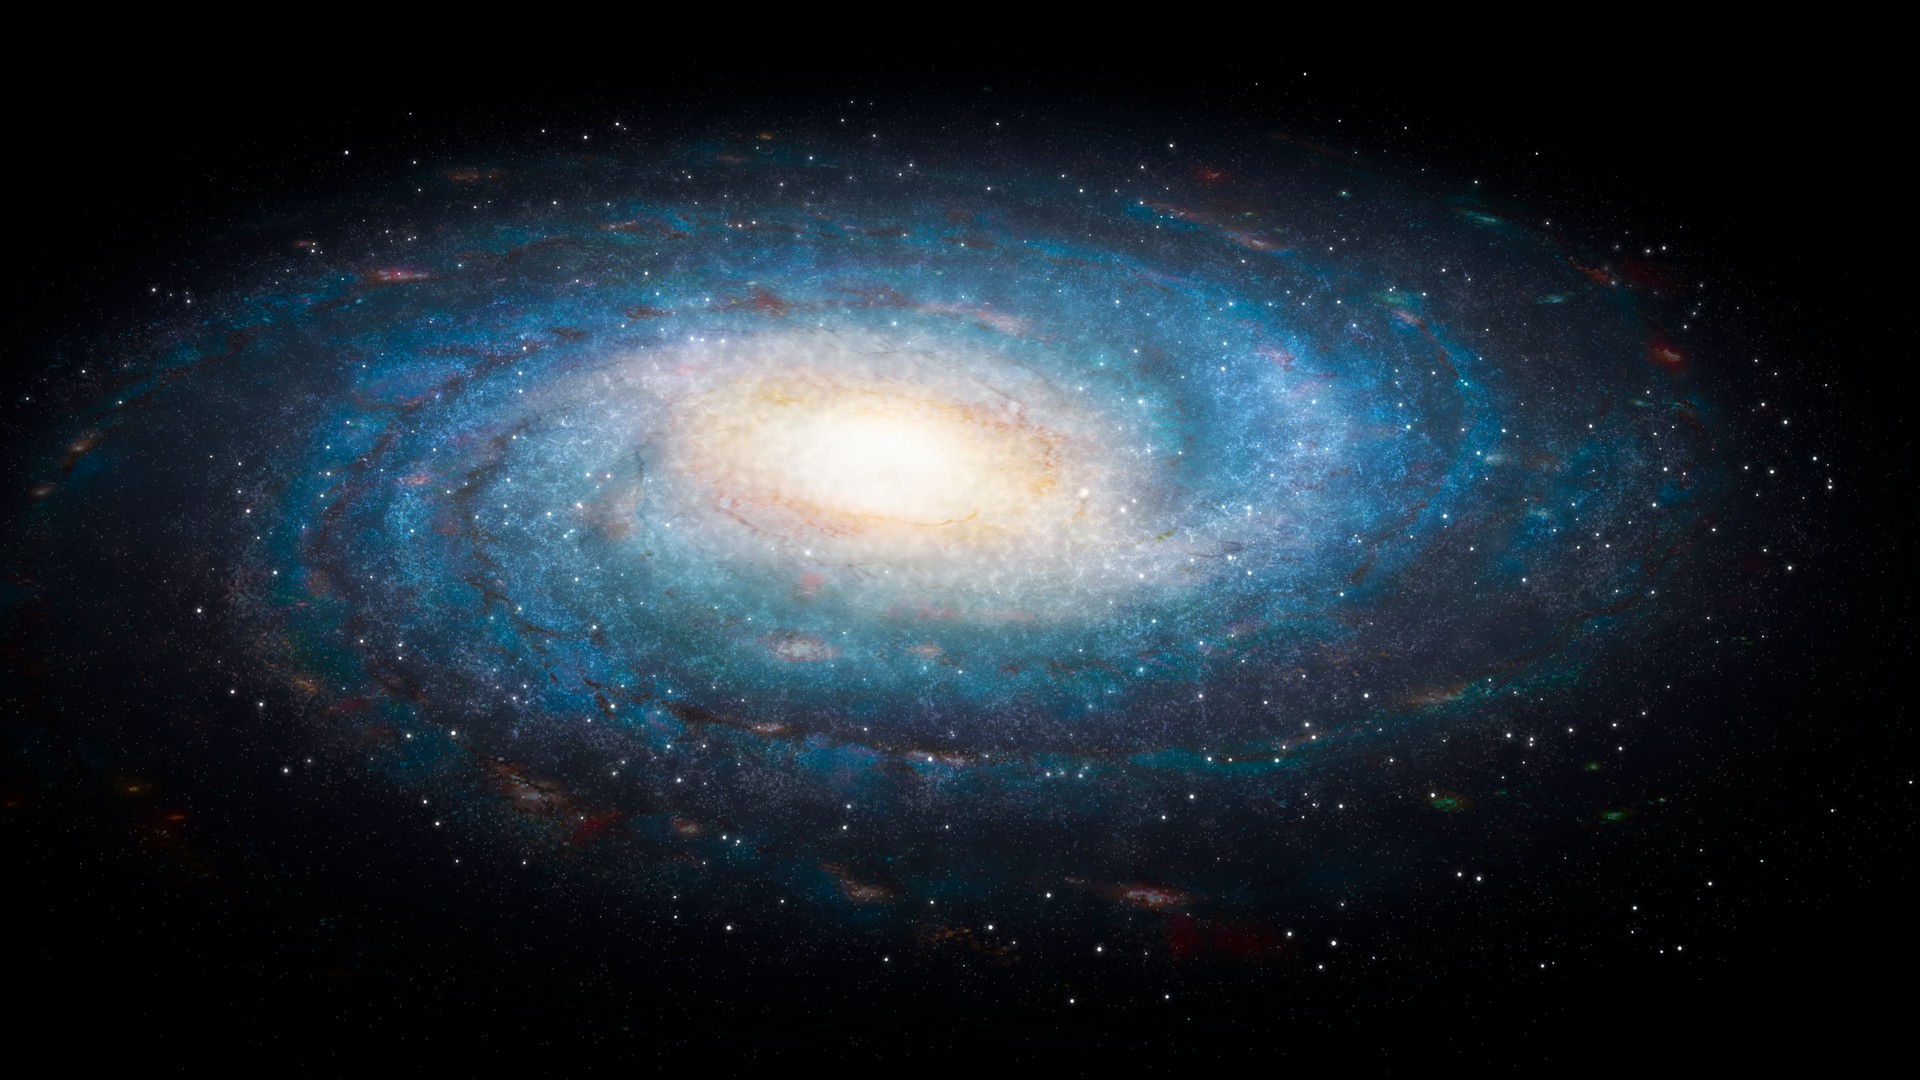 How do we know what the Milky Way looks like? Space